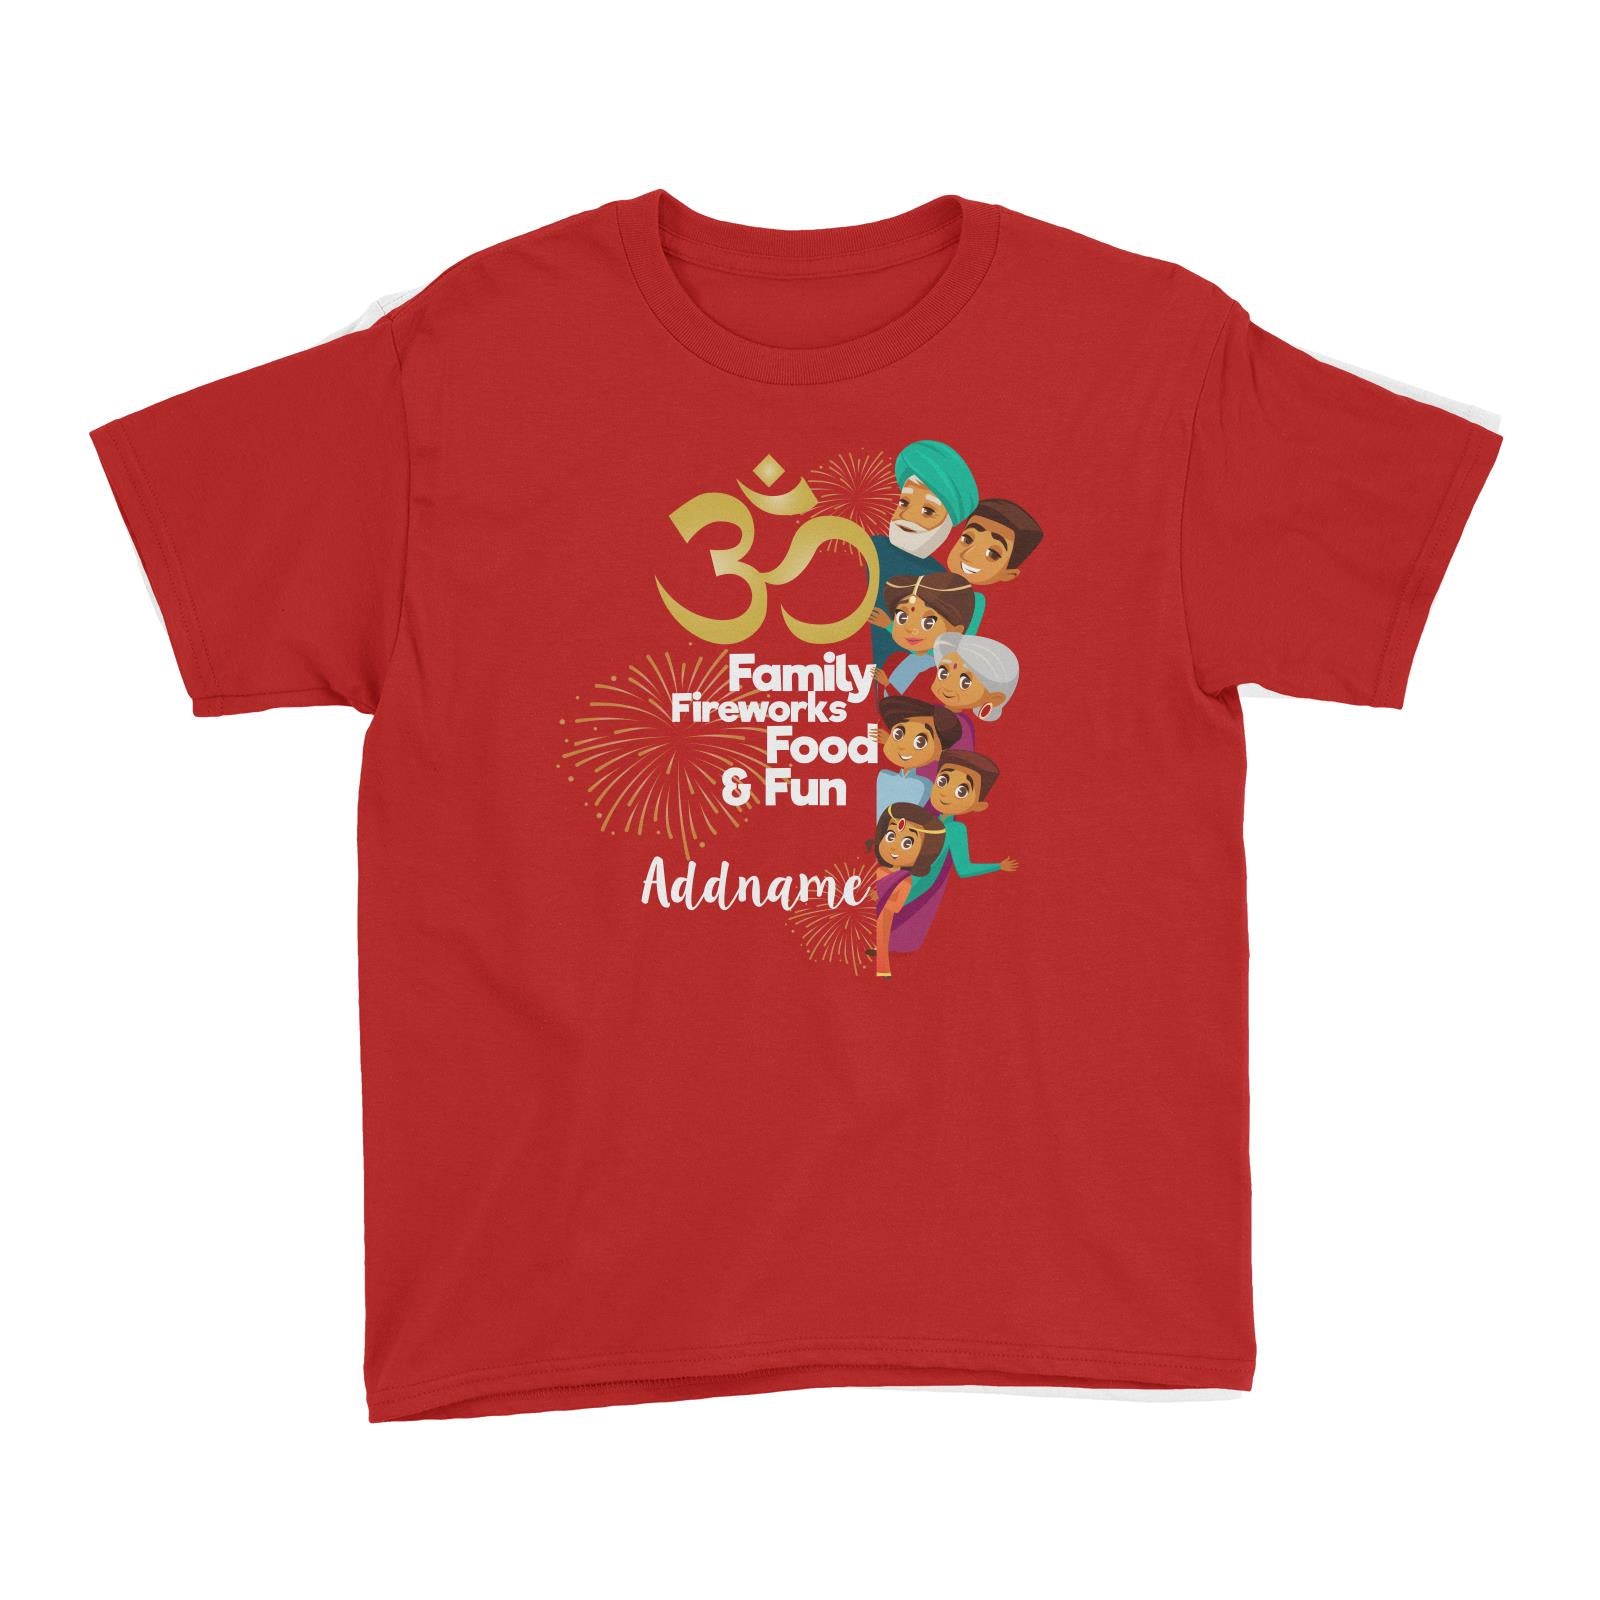 Cute Family OM Family Fireworks Food and Fun Addname Kid's T-Shirt